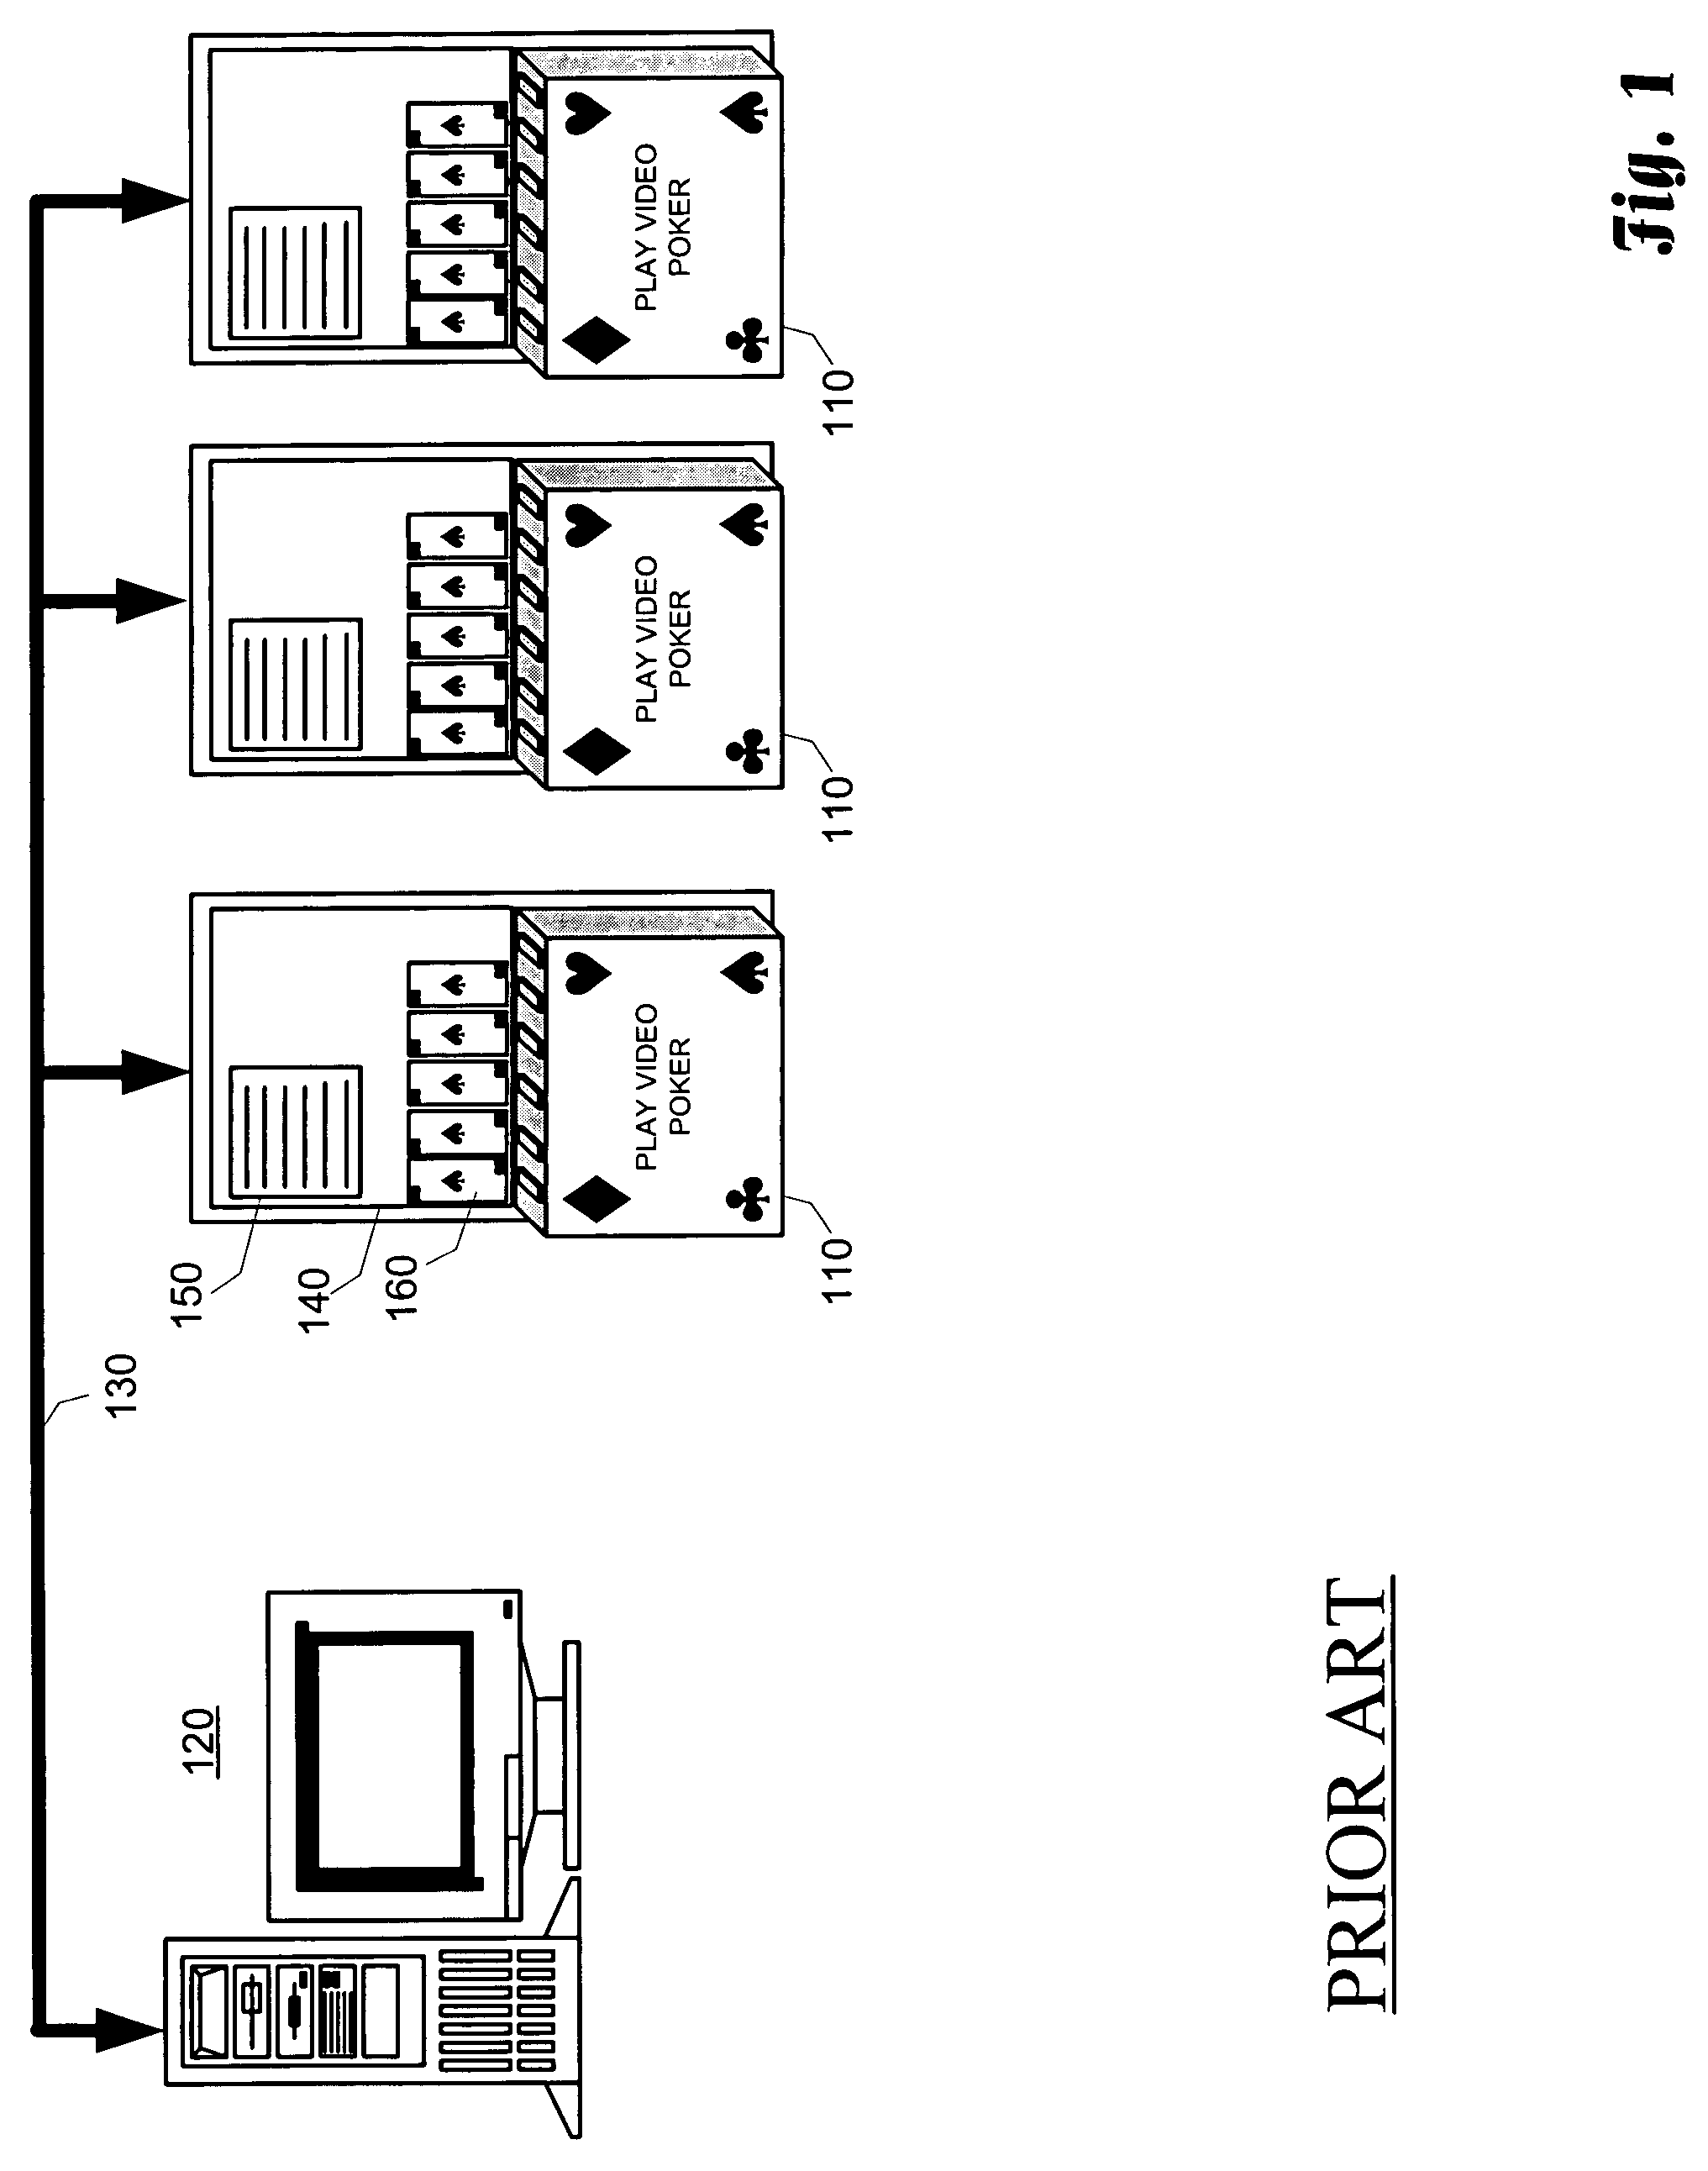 Closed-loop system for displaying promotional events and granting awards for electronic video games